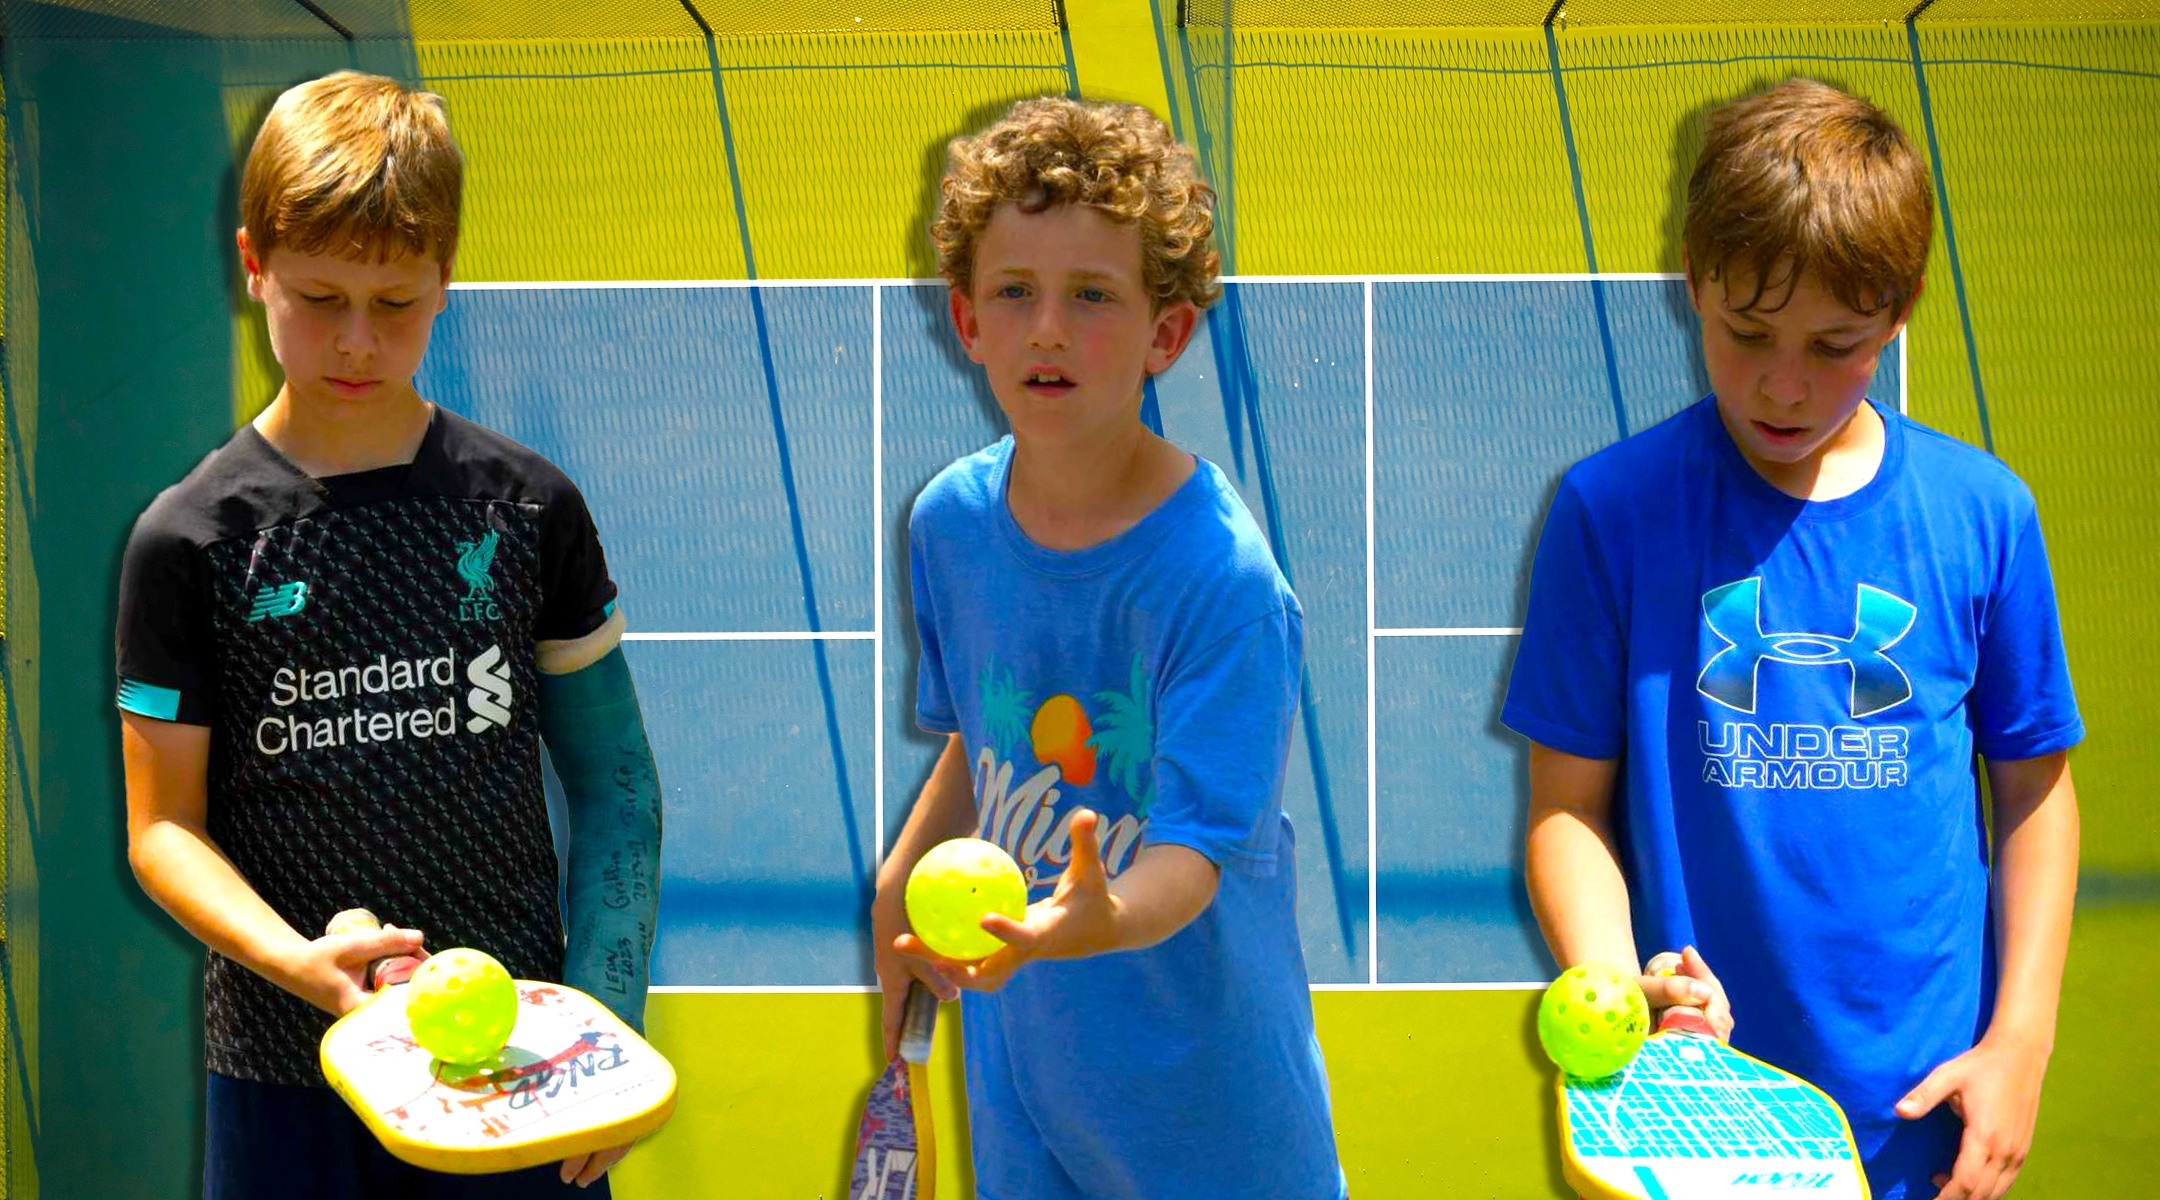 Pickleball has exploded in popularity at Jewish summer camps. (Courtesy of Camp Avoda; design by Mollie Suss)